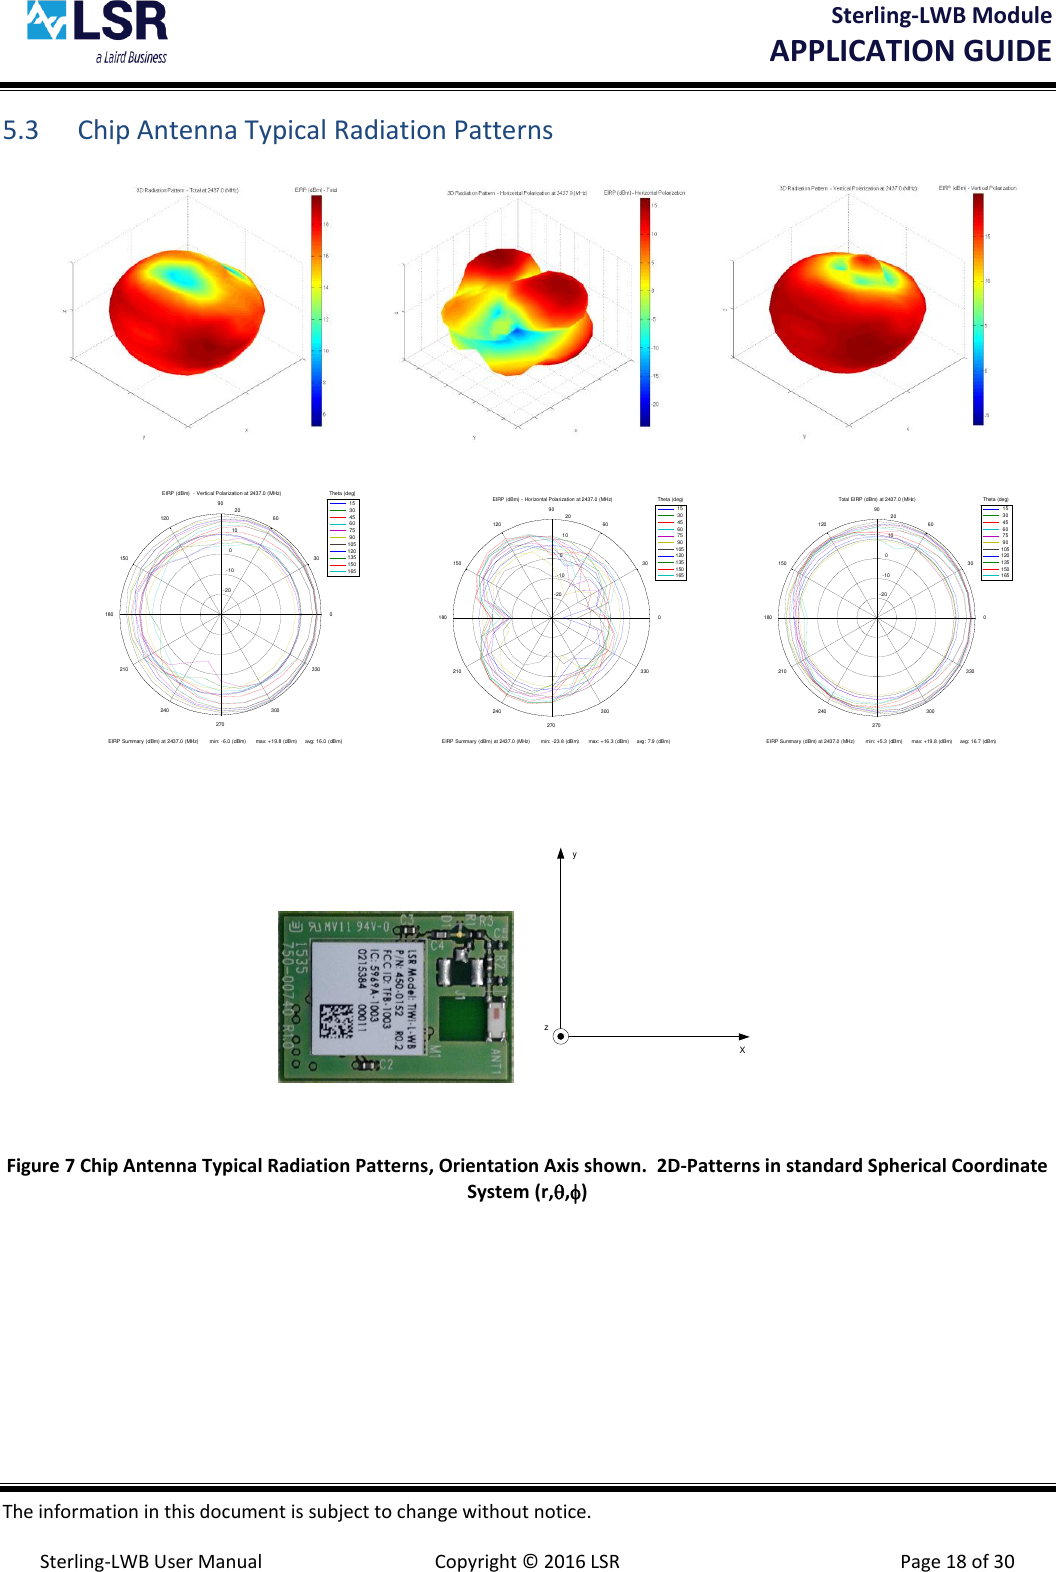 Sterling-LWB Module       APPLICATION GUIDE  The information in this document is subject to change without notice.  Sterling-LWB User Manual  Copyright © 2016 LSR  Page 18 of 30 5.3 Chip Antenna Typical Radiation Patterns                                                                                                             Xyz  Figure 7 Chip Antenna Typical Radiation Patterns, Orientation Axis shown.  2D-Patterns in standard Spherical Coordinate System (r,,)    -20-1001020302106024090270120300150330180 0EIRP (dBm)  - Vertical Polarization at 2437.0 (MHz)EIRP Summary (dBm) at 2437.0 (MHz)       min: -6.0 (dBm)      max: +19.8 (dBm)     avg: 16.0 (dBm)   15 30 45 60 75 90105120135150165Theta (deg)-20-1001020302106024090270120300150330180 0EIRP (dBm) - Horizontal Polarization at 2437.0 (MHz)EIRP Summary (dBm) at 2437.0 (MHz)       min: -23.8 (dBm)      max: +16.3 (dBm)     avg: 7.9 (dBm)   15 30 45 60 75 90105120135150165Theta (deg)-20-1001020302106024090270120300150330180 0Total EIRP (dBm) at 2437.0 (MHz)EIRP Summary (dBm) at 2437.0 (MHz)       min: +5.3 (dBm)      max: +19.8 (dBm)     avg: 16.7 (dBm)   15 30 45 60 75 90105120135150165Theta (deg)